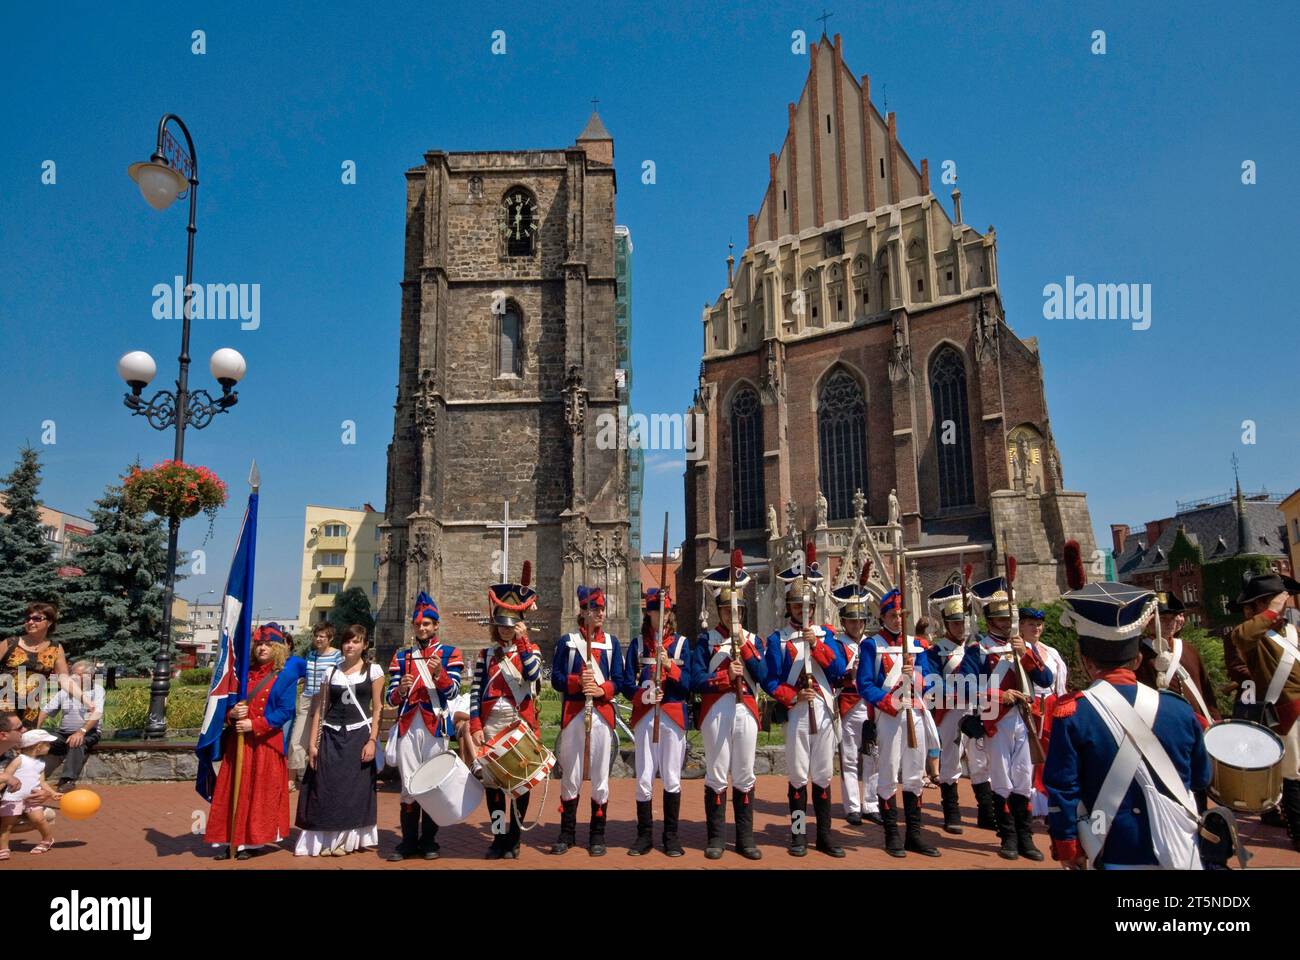 Reenactors in historic uniforms of Napoleon infantry before Reenactment of Siege of Neisse during Napoleonic War with Prussia in 1807, in Nysa, Poland Stock Photo